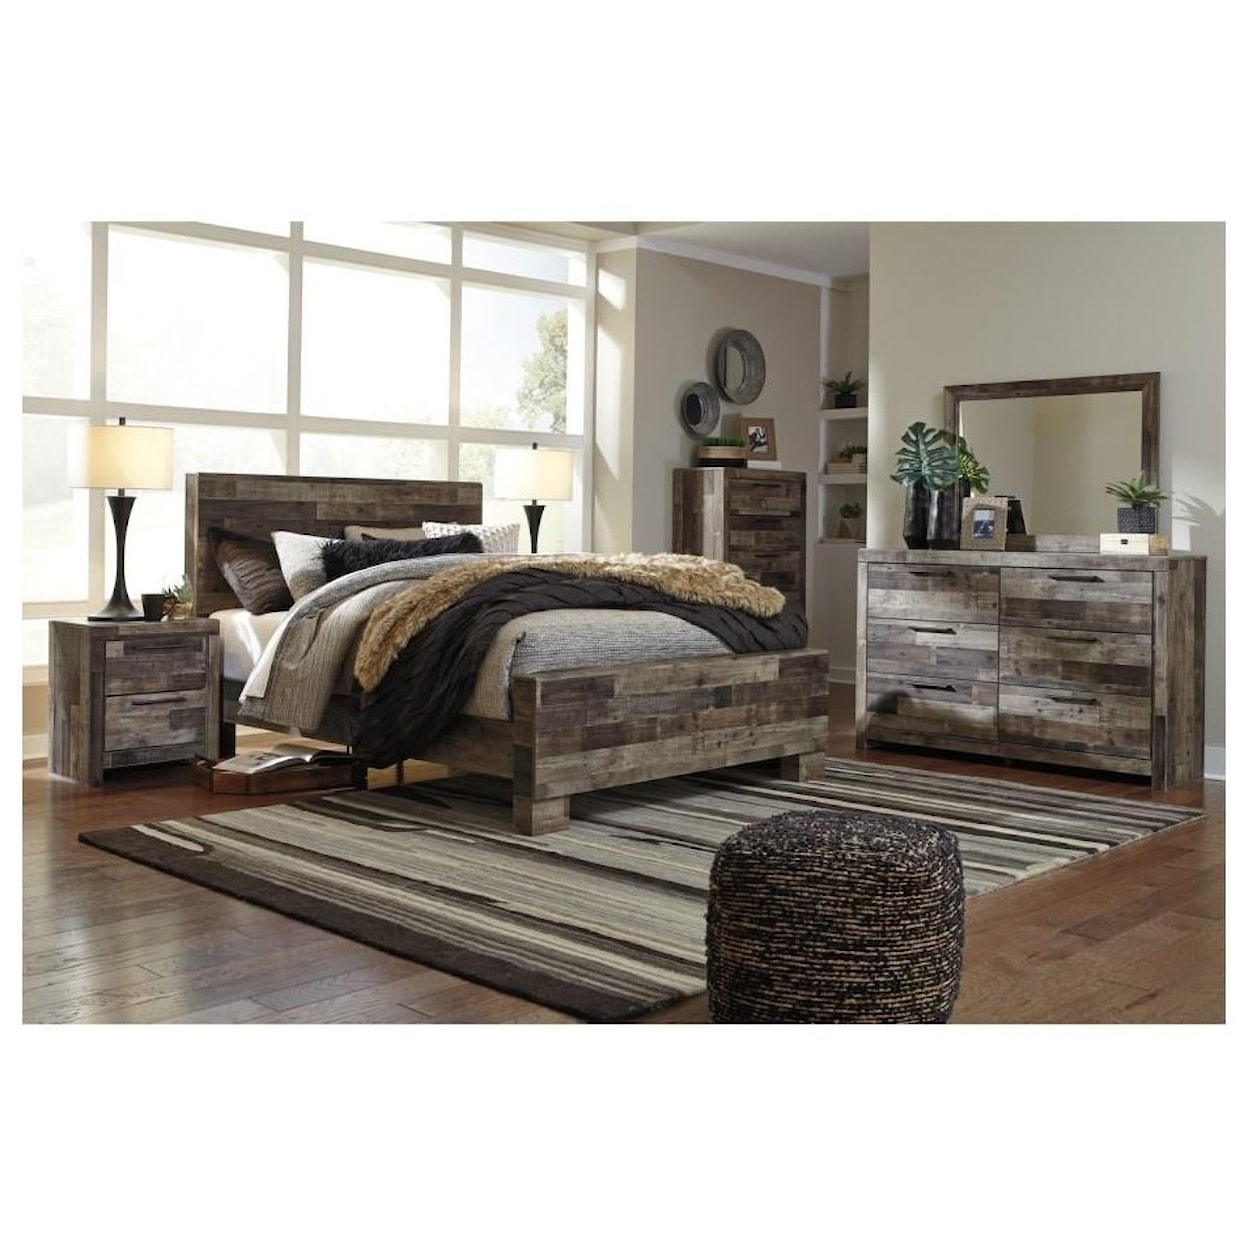 Ashley Furniture Benchcraft Derekson Twin Bedroom Group without Chest